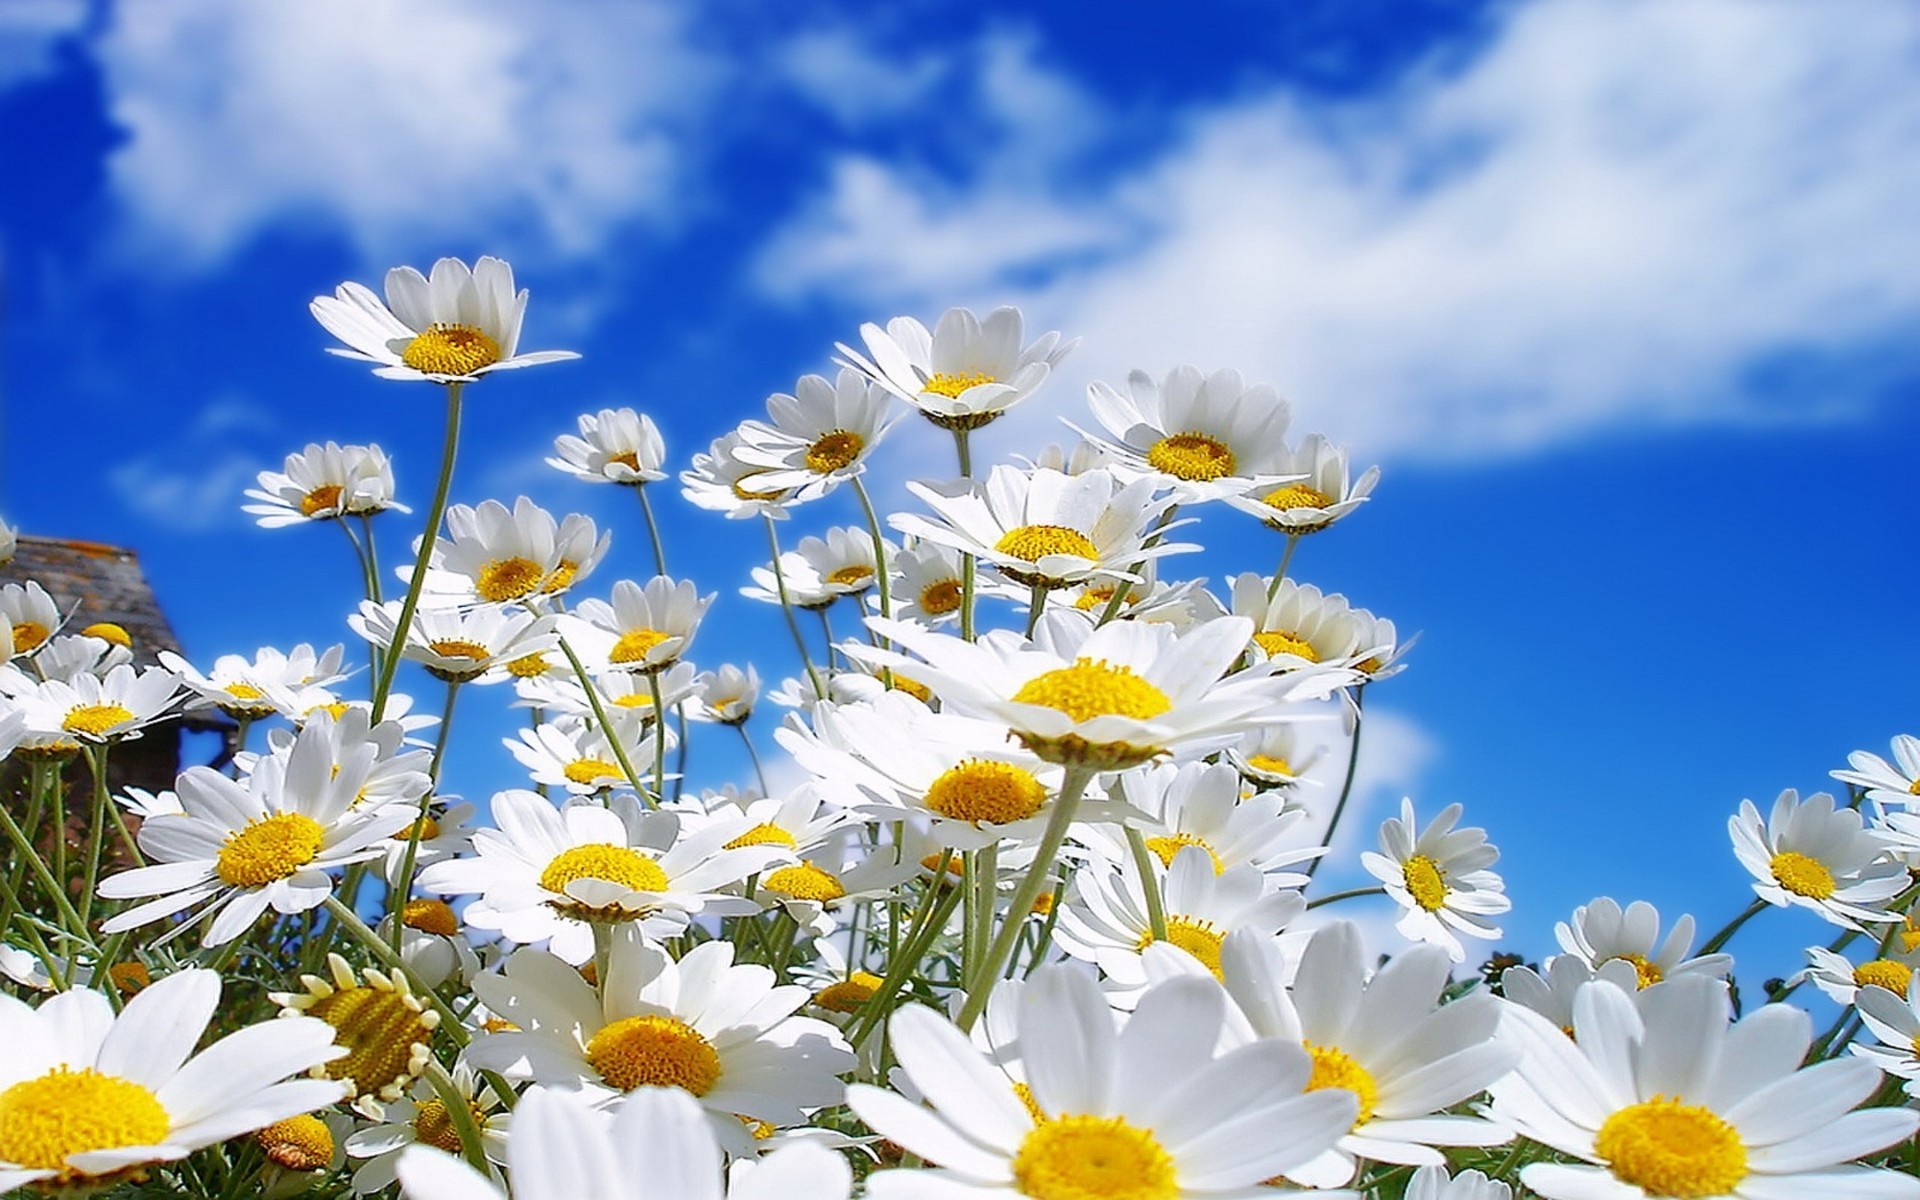 Daisies Wallpapers - HD Images New